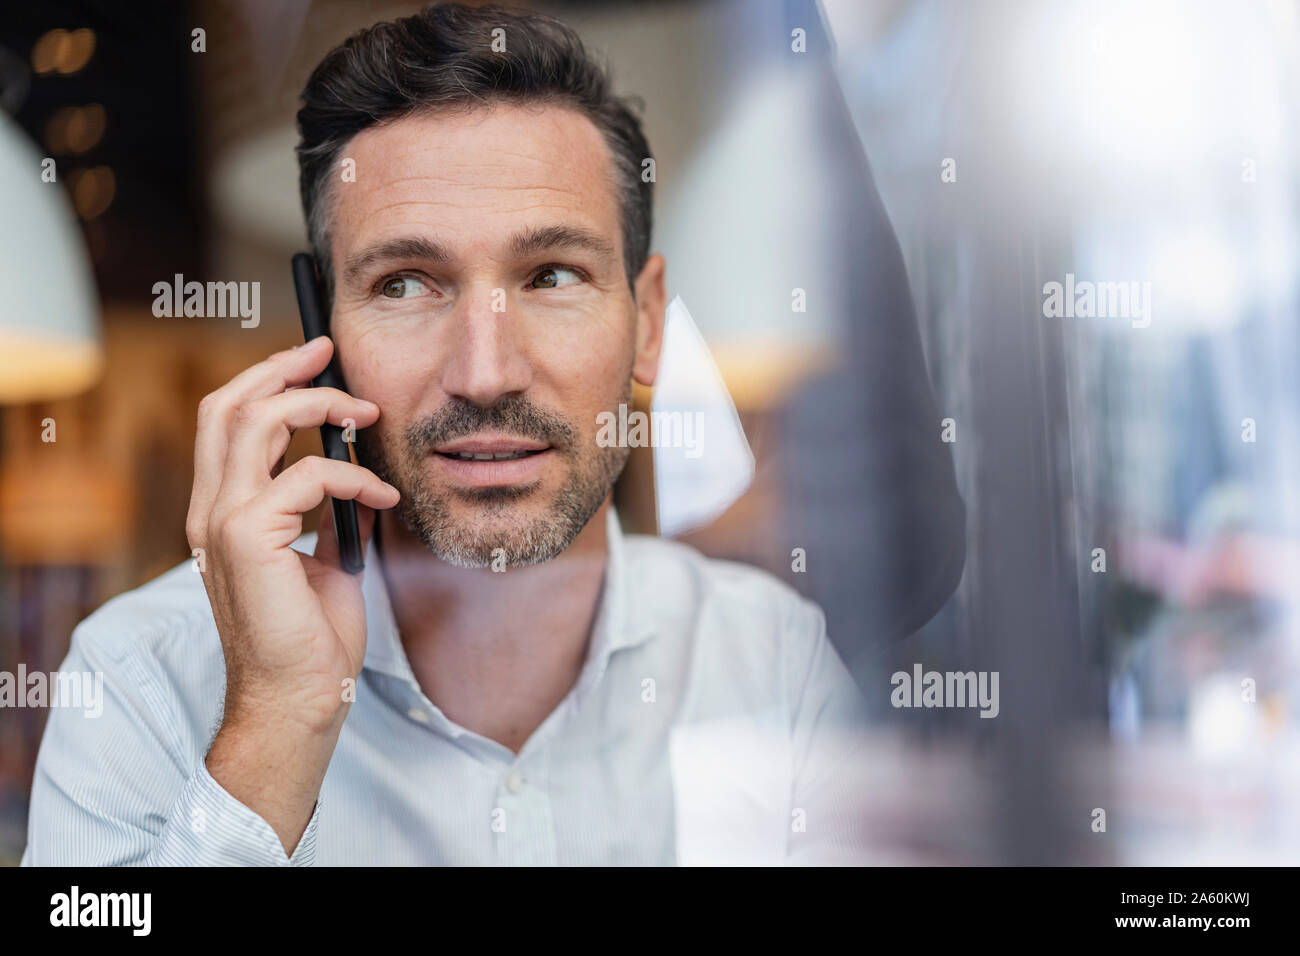 Portrait of businessman on the phone behind windowpane in a cafe Stock Photo